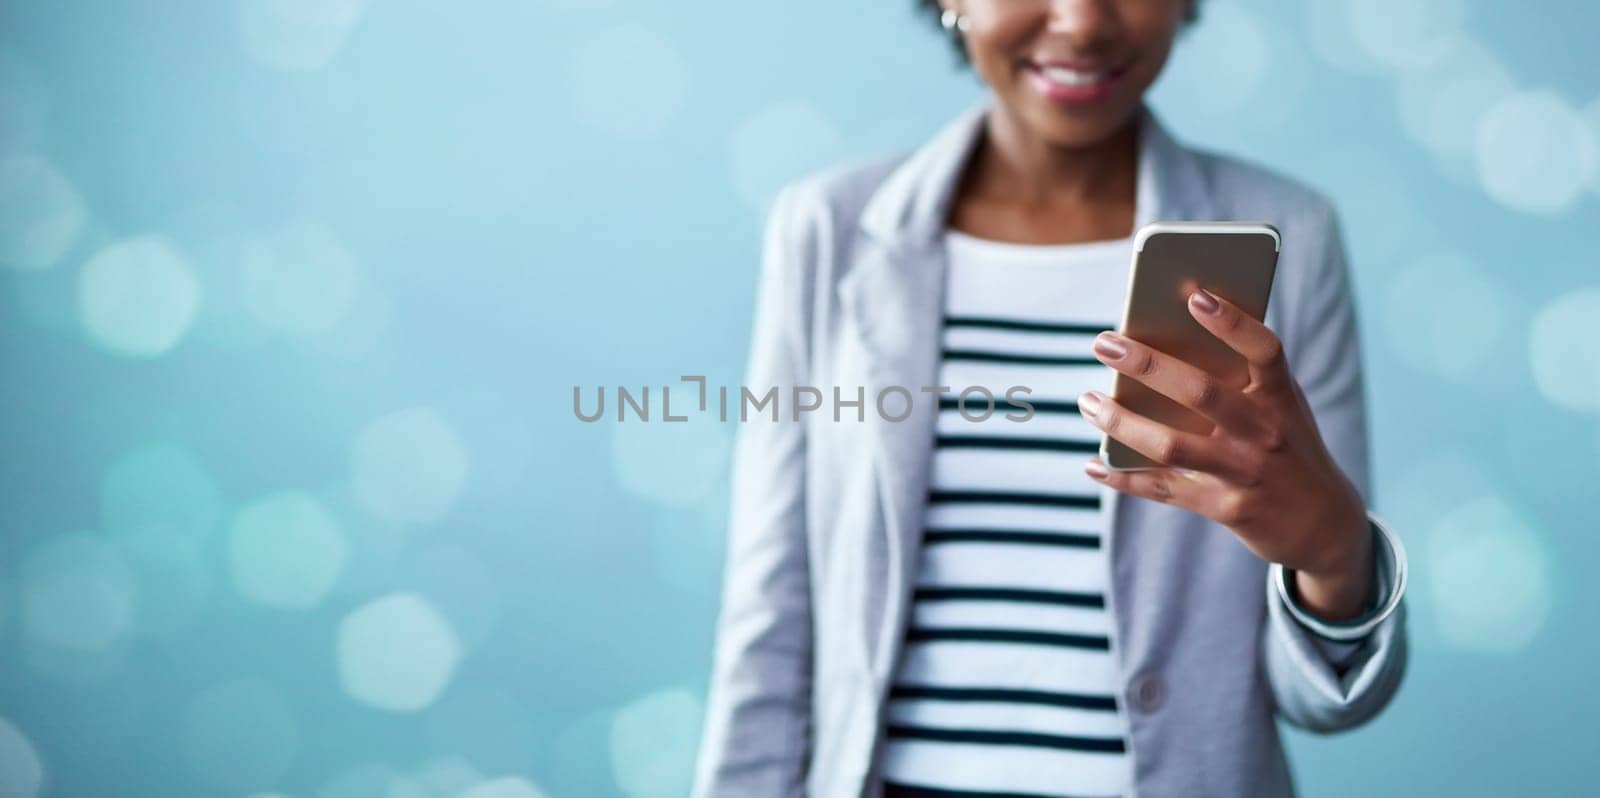 Cropped studio shot of a young businesswoman using a mobile phone against a blue background.